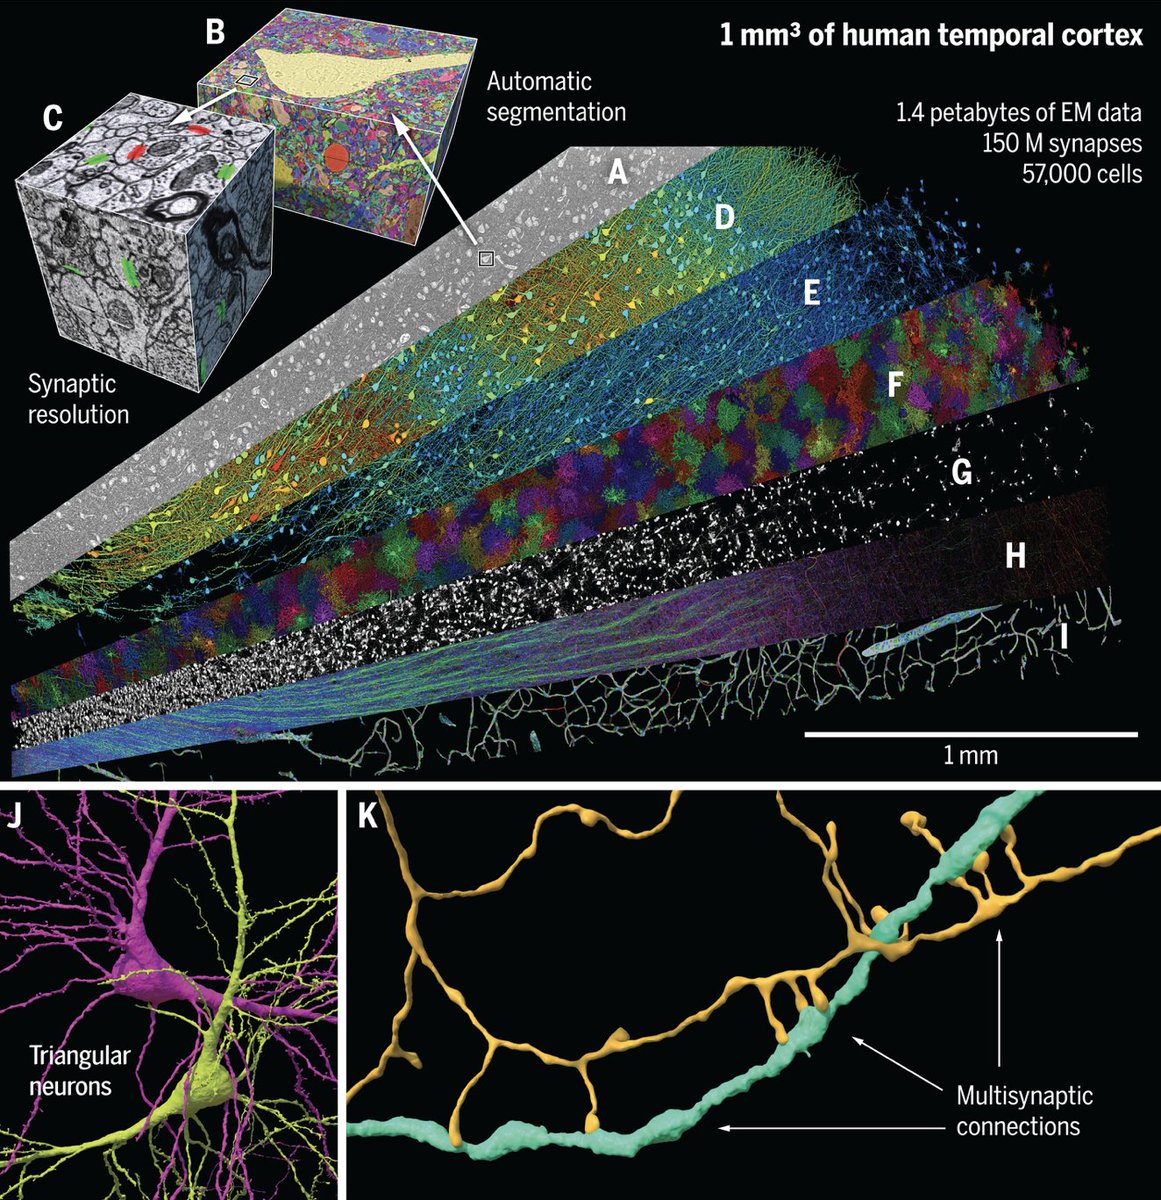 A petavoxel fragment of human cerebral cortex reconstructed at nanoscale resolution

Just published in Science.

This is spectacular work! 

The authors obtained a 1 mm3 sample of the human temporal cortex from an individual undergoing epileptic surgery. This sample was then